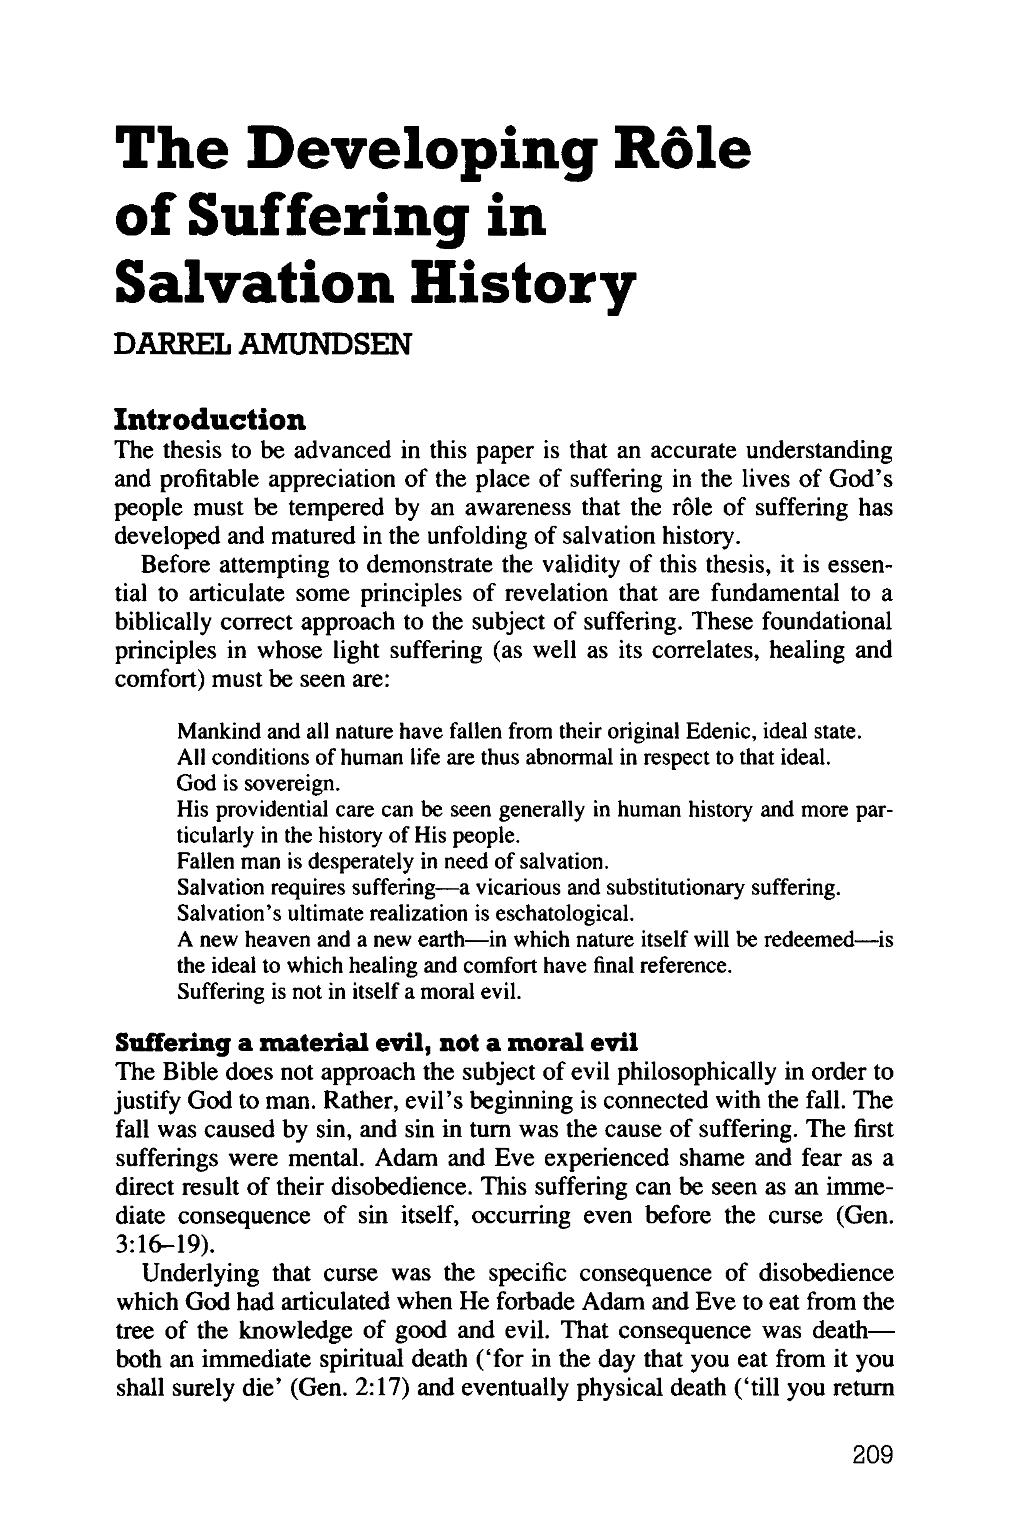 The Developing Role of Suffering in Salvation History DARREL AMUNDSEN